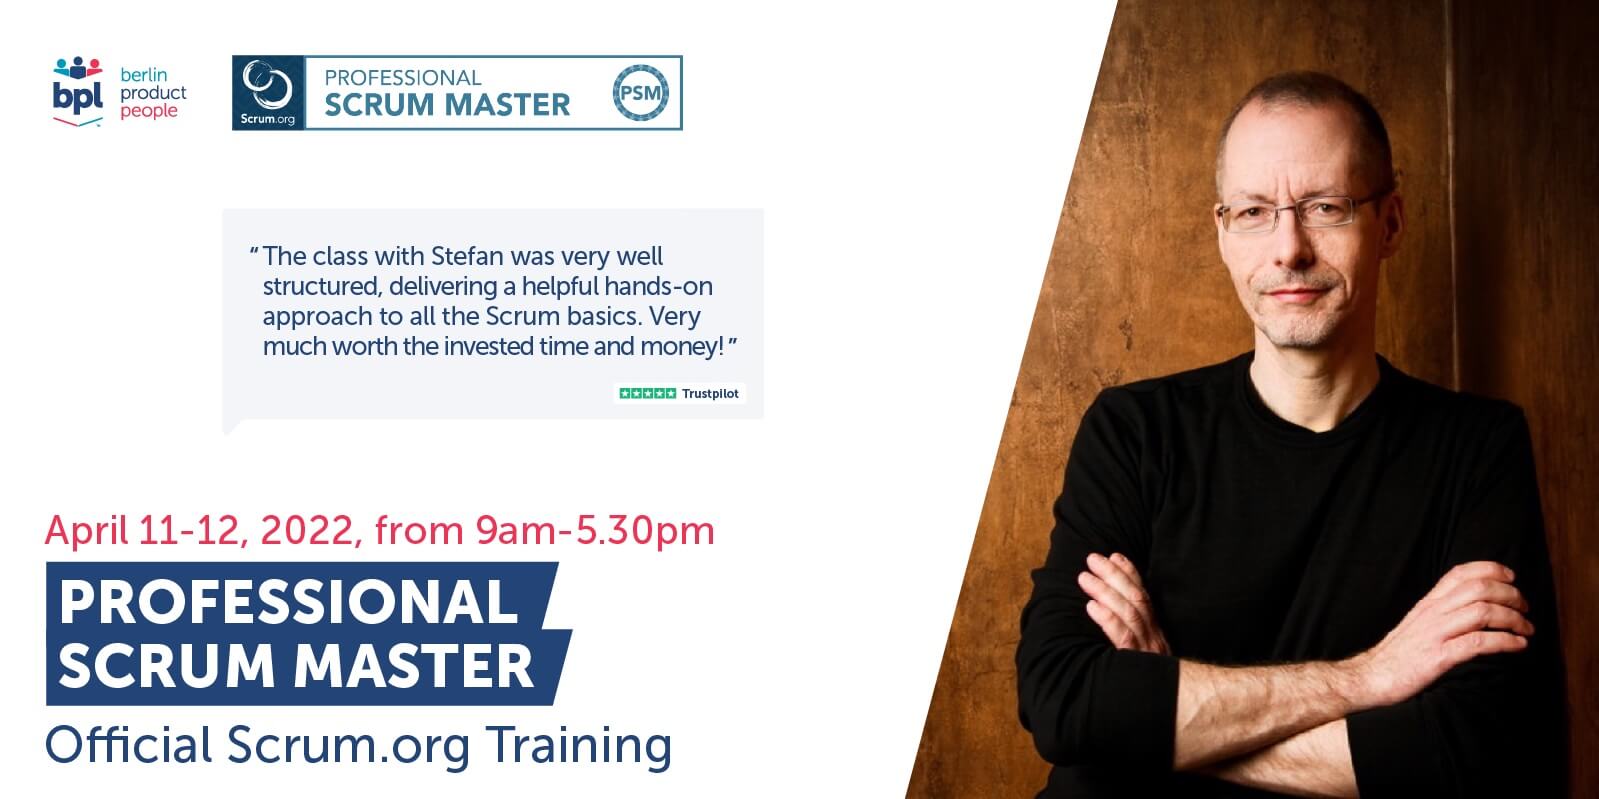 Professional Scrum Master Online Training w/ PSM I Certificate: April 11-12, 2022 — Berlin Product People GmbH